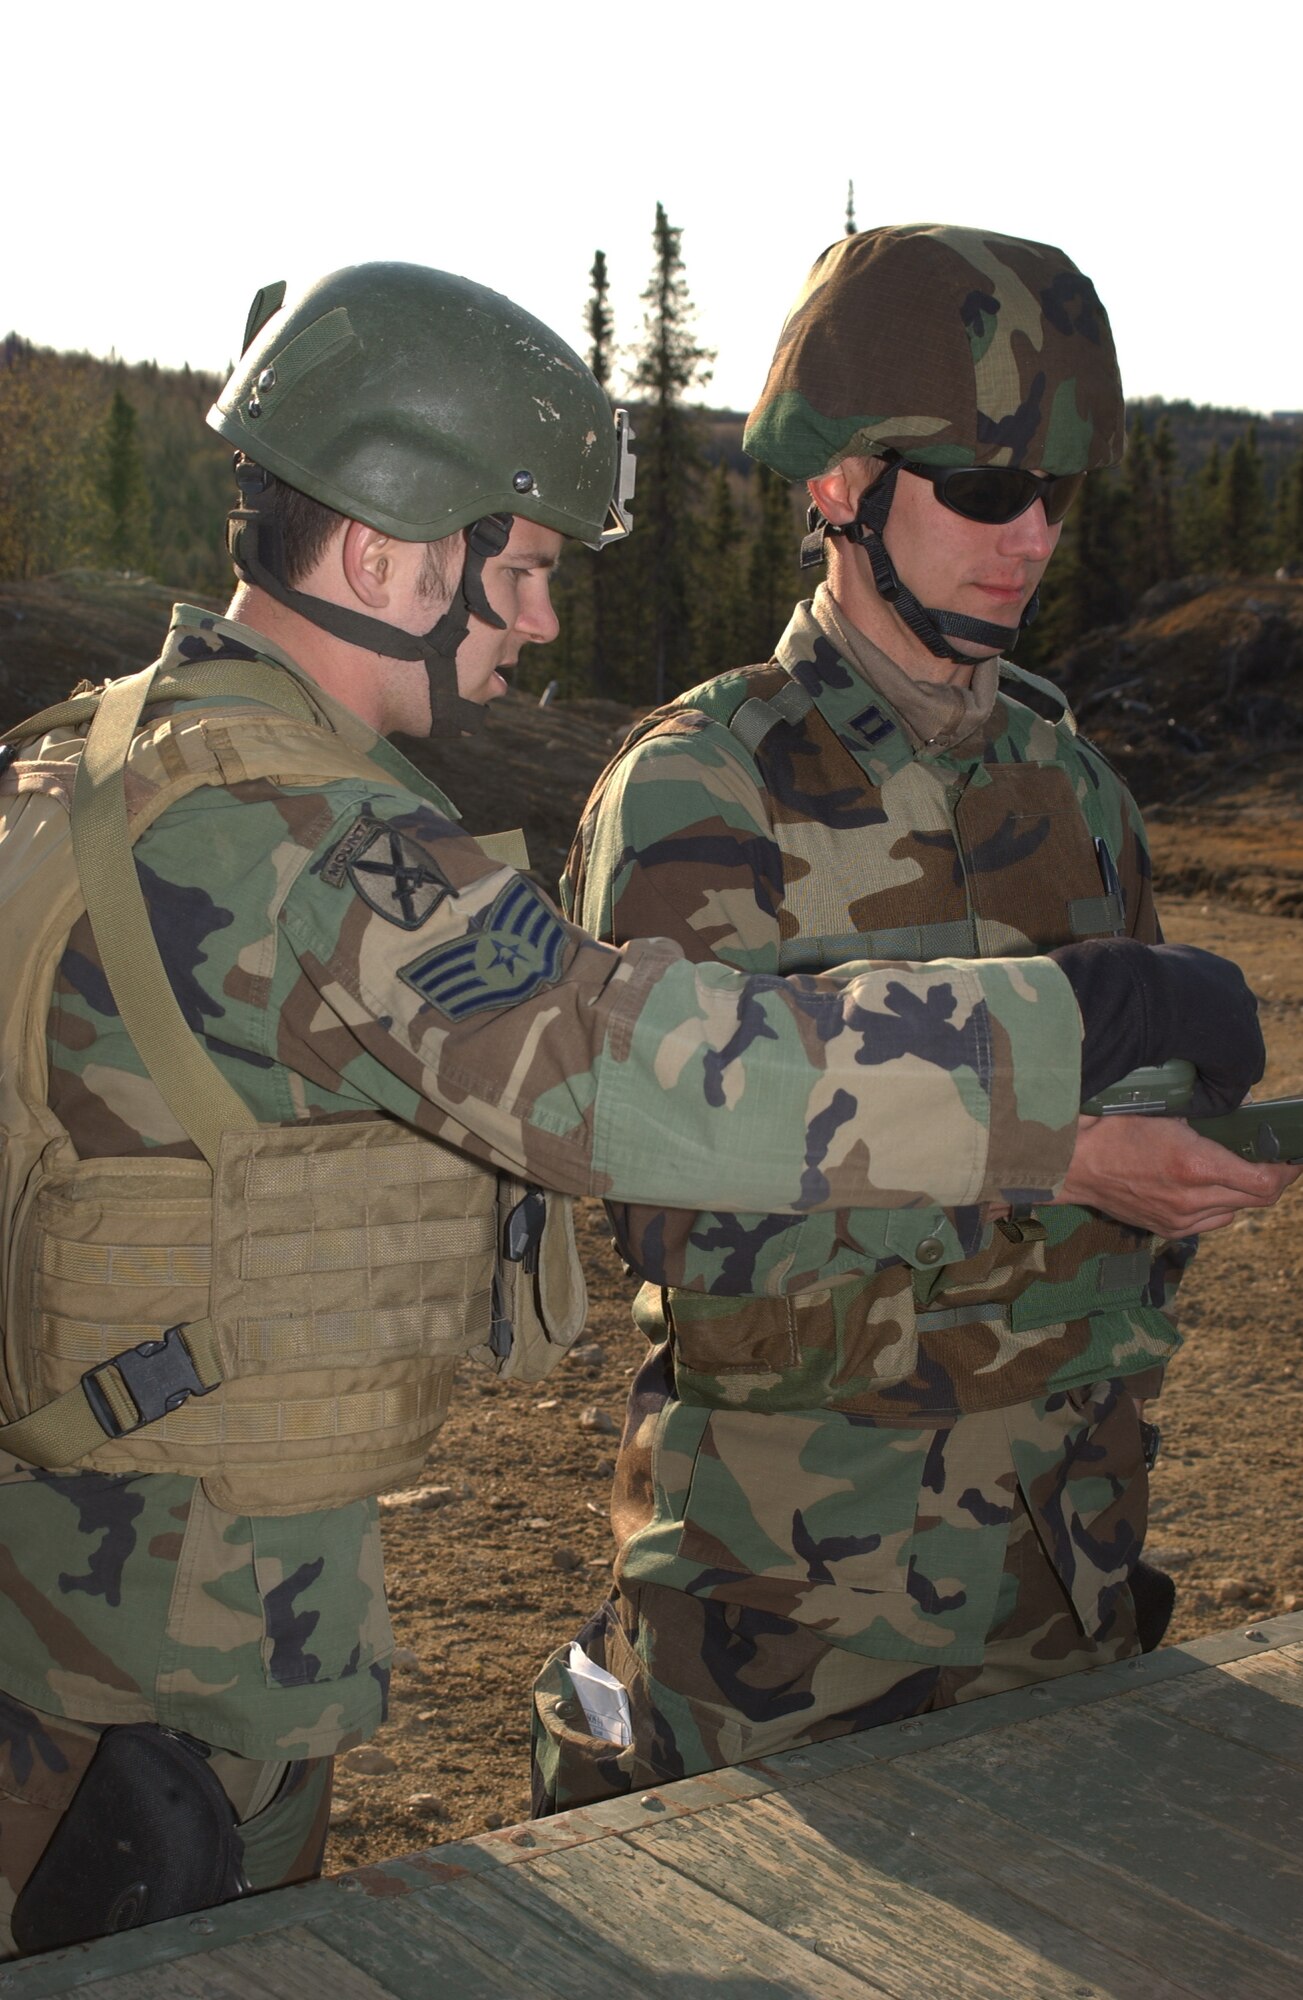 EIELSON AIR FORCE BASE, Alaska --  Tactical Air Control Party members, 3rd Air Support Operations Squadron, Staff Sgt. Peyton Knippel (left), instructs Capt. Eric Sobecki on a PSN-13 Defense Advance GPS receiver. The device is used to find location coordinates during Operation URSA Minor May 16 in the Pacific Alaska Range Complex. The 3rd ASOS trains, equips, and maintains mission-ready air liaison, terminal attack control, and weather observation/forecasting elements to support the U.S. Army Alaska 1st Stryker Brigade Combat Team. (U.S. Air Force Photo by Airman 1st Class Jonathan Snyder) (Released)Observation/Forecasting elements to support the U.S. Army Alaska 1st Stryker Brigade Combat Team. Both are assigned to the 3rd Air Support Operations Squadron, Tactical Air Control Party, Fort Wainwright, AK. (U.S. Air Force Photo by Airman 1st Class Jonathan Snyder) 